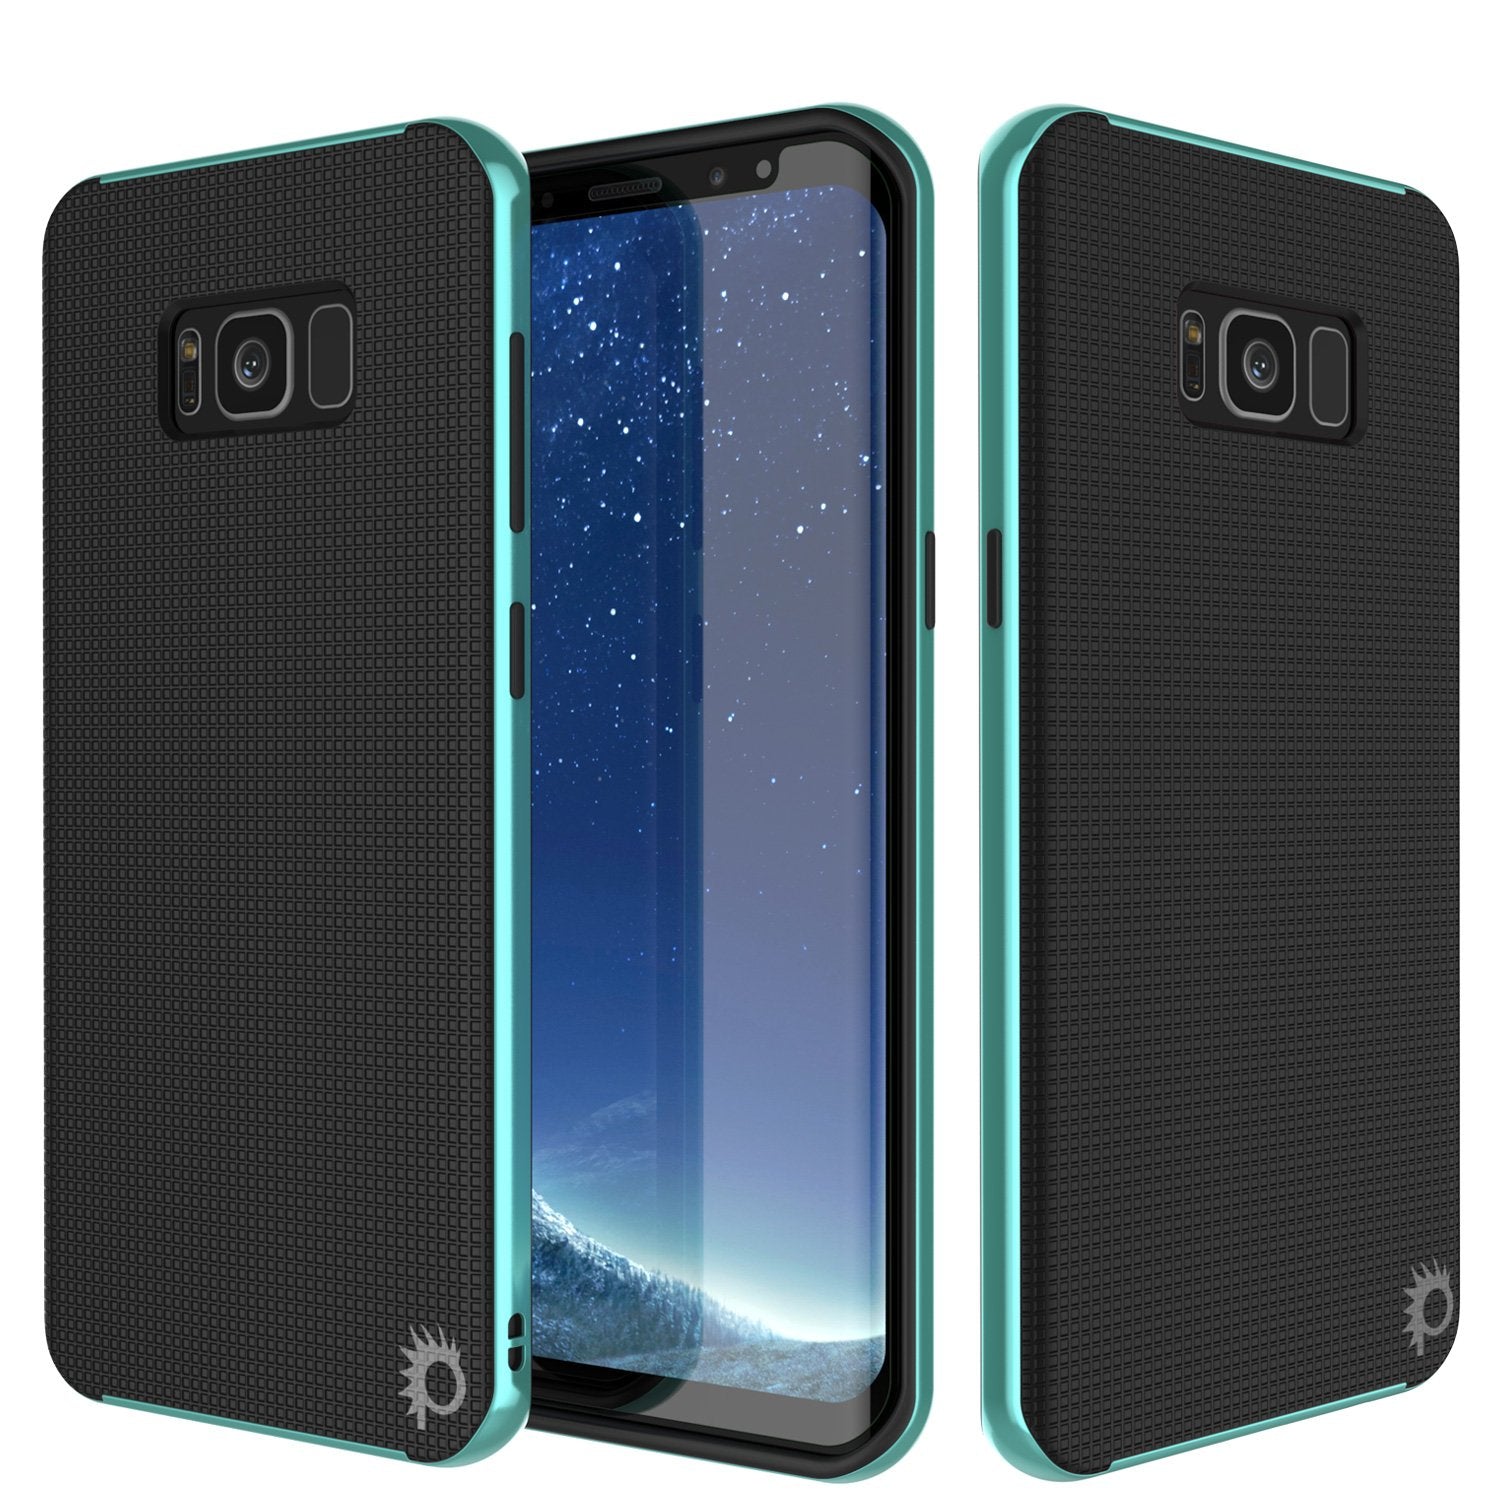 Galaxy S8 Case, PunkCase [Stealth Series] Hybrid 3-Piece Shockproof Dual Layer Cover [Non-Slip] [Soft TPU + PC Bumper] with PUNKSHIELD Screen Protector for Samsung S8 Edge [Teal]